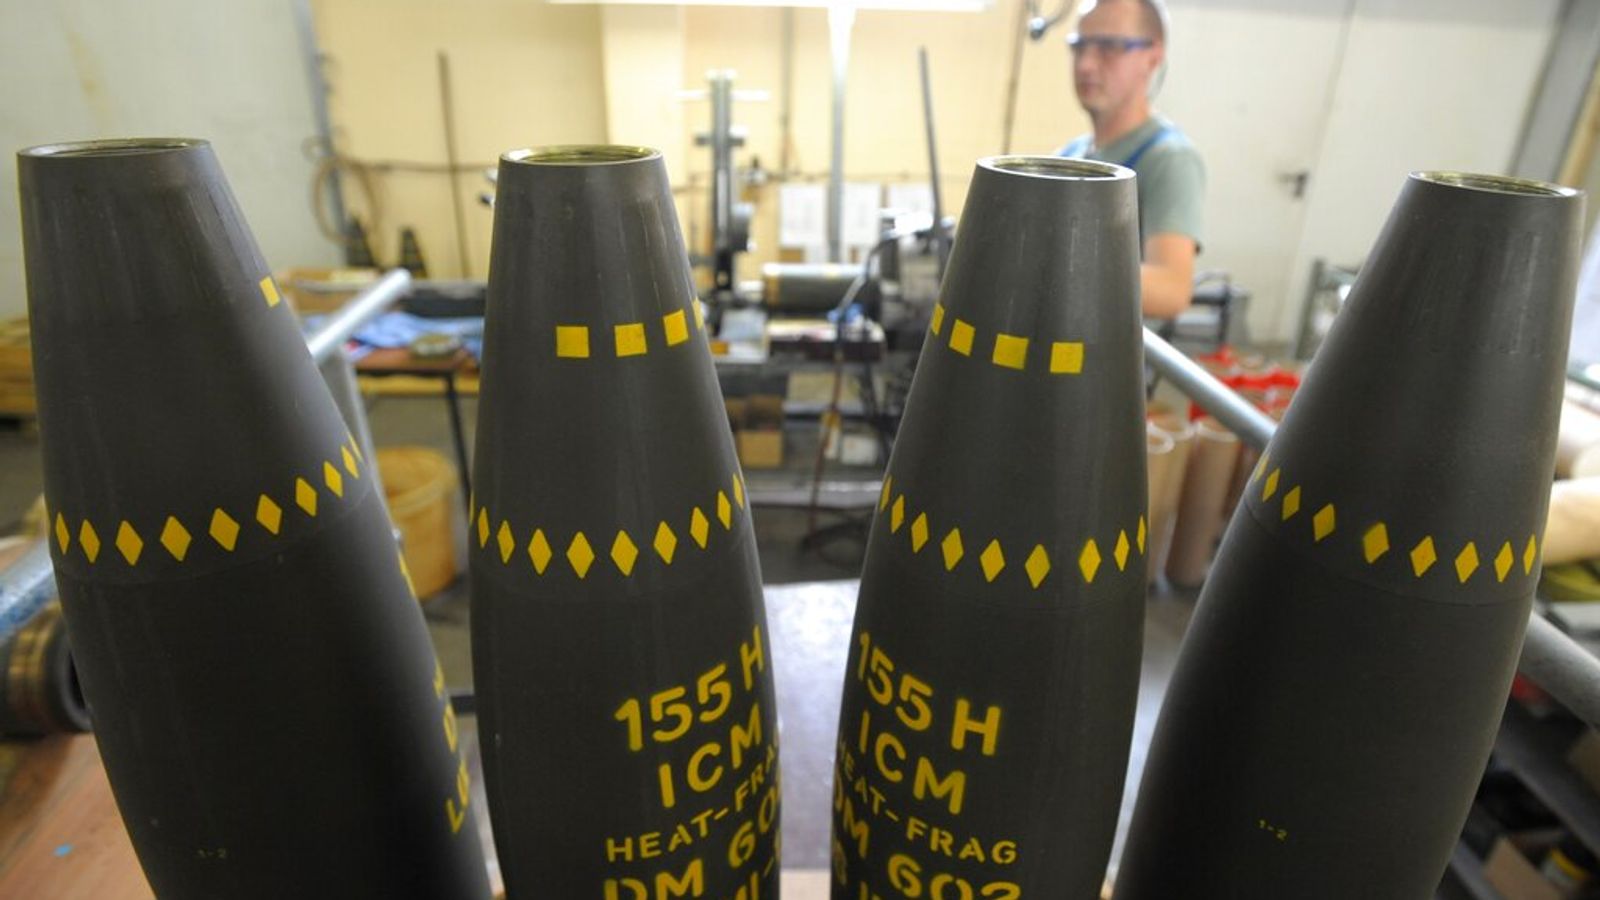 President Biden agrees to send controversial cluster munitions to Ukraine